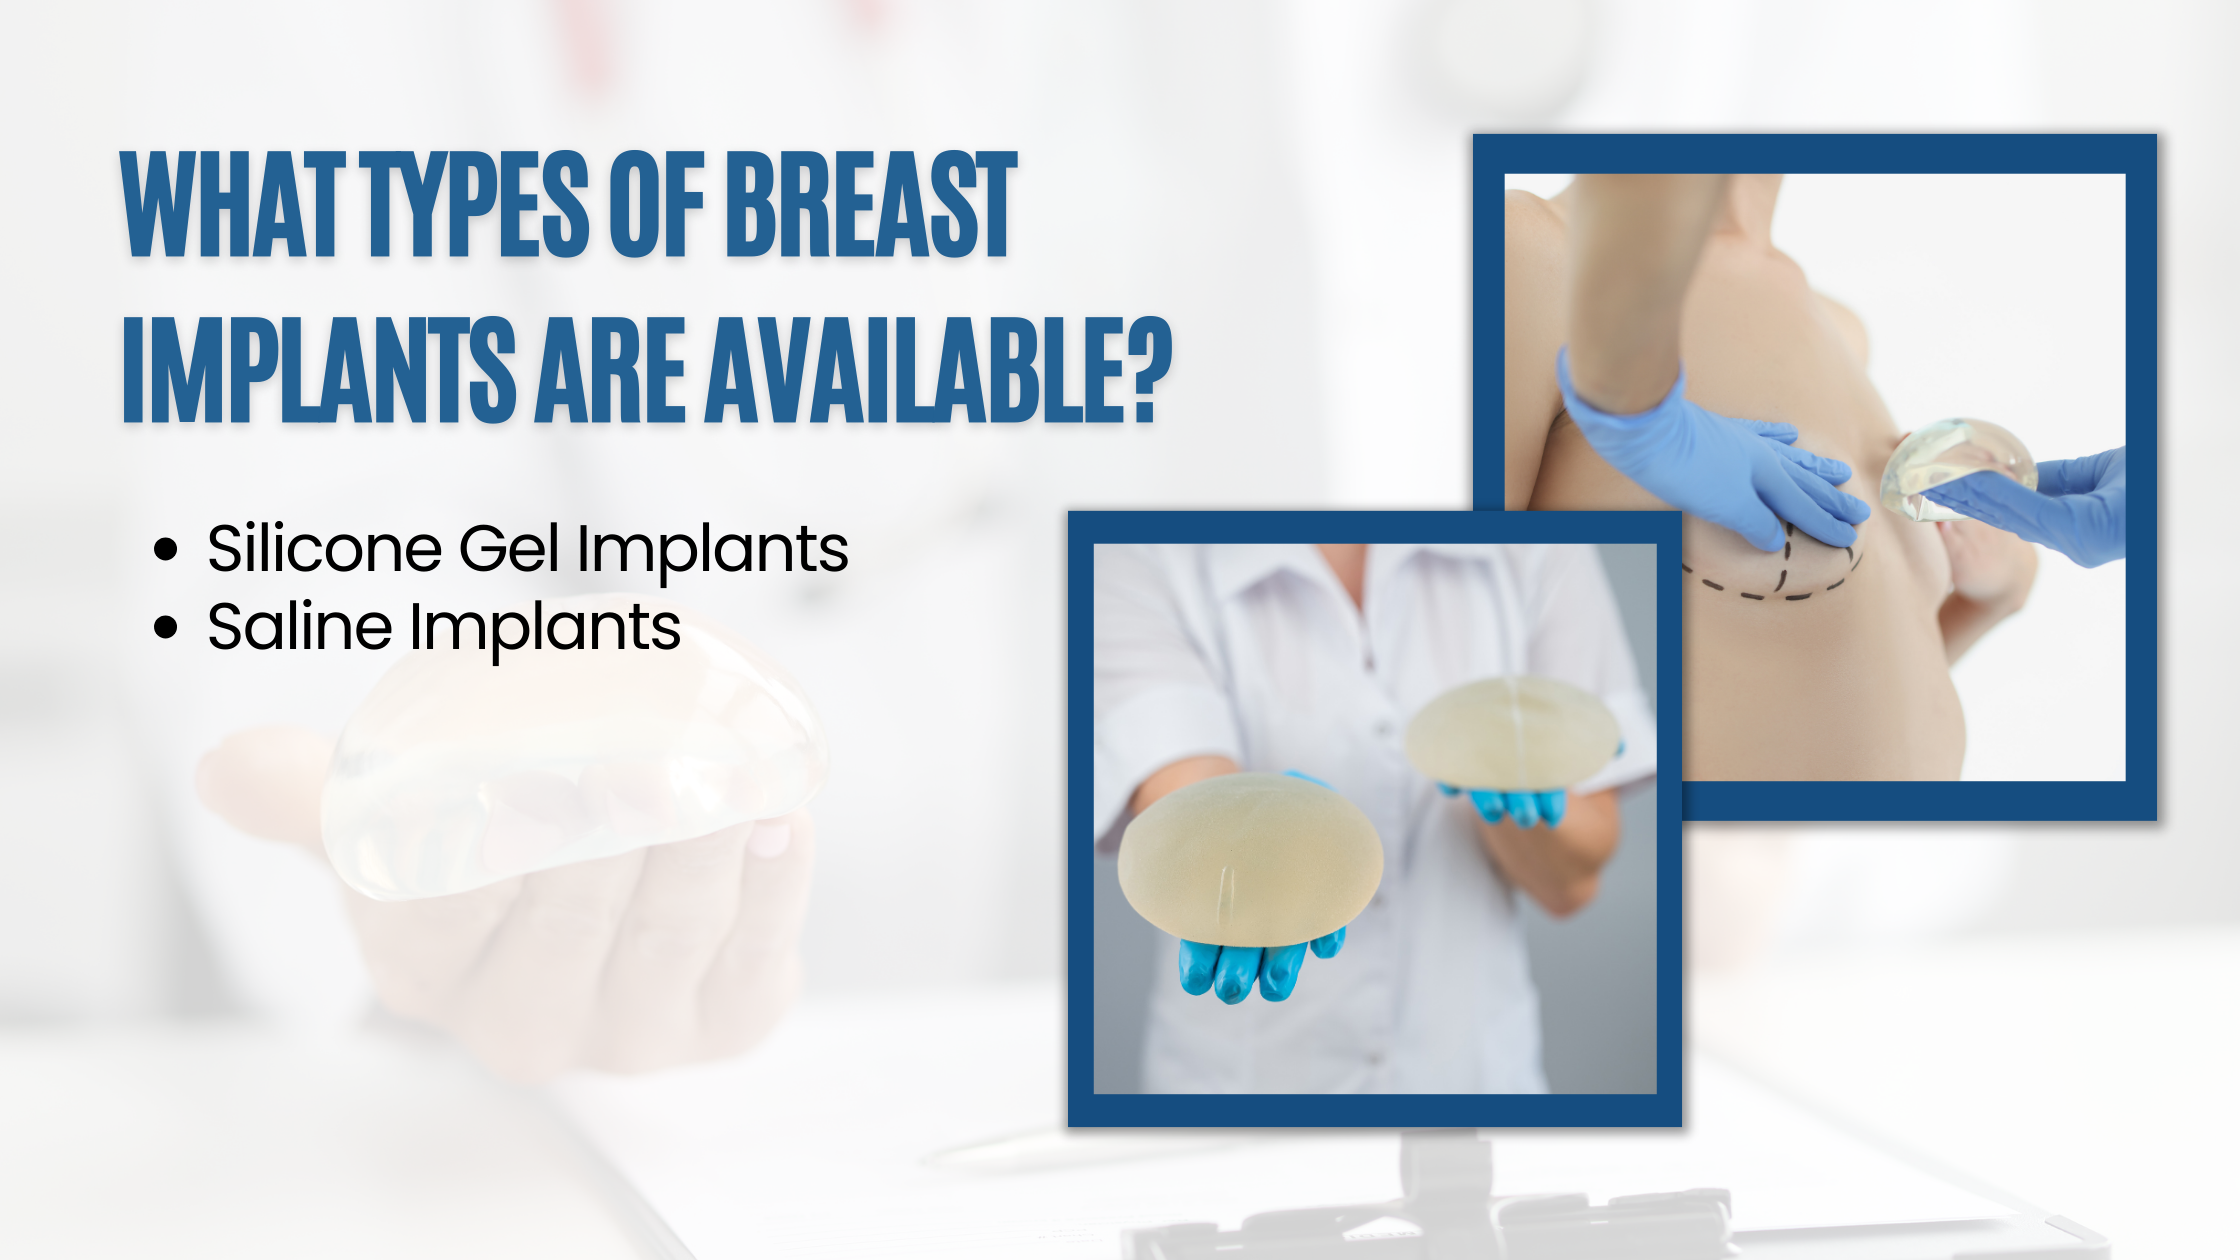 Available breast implant types